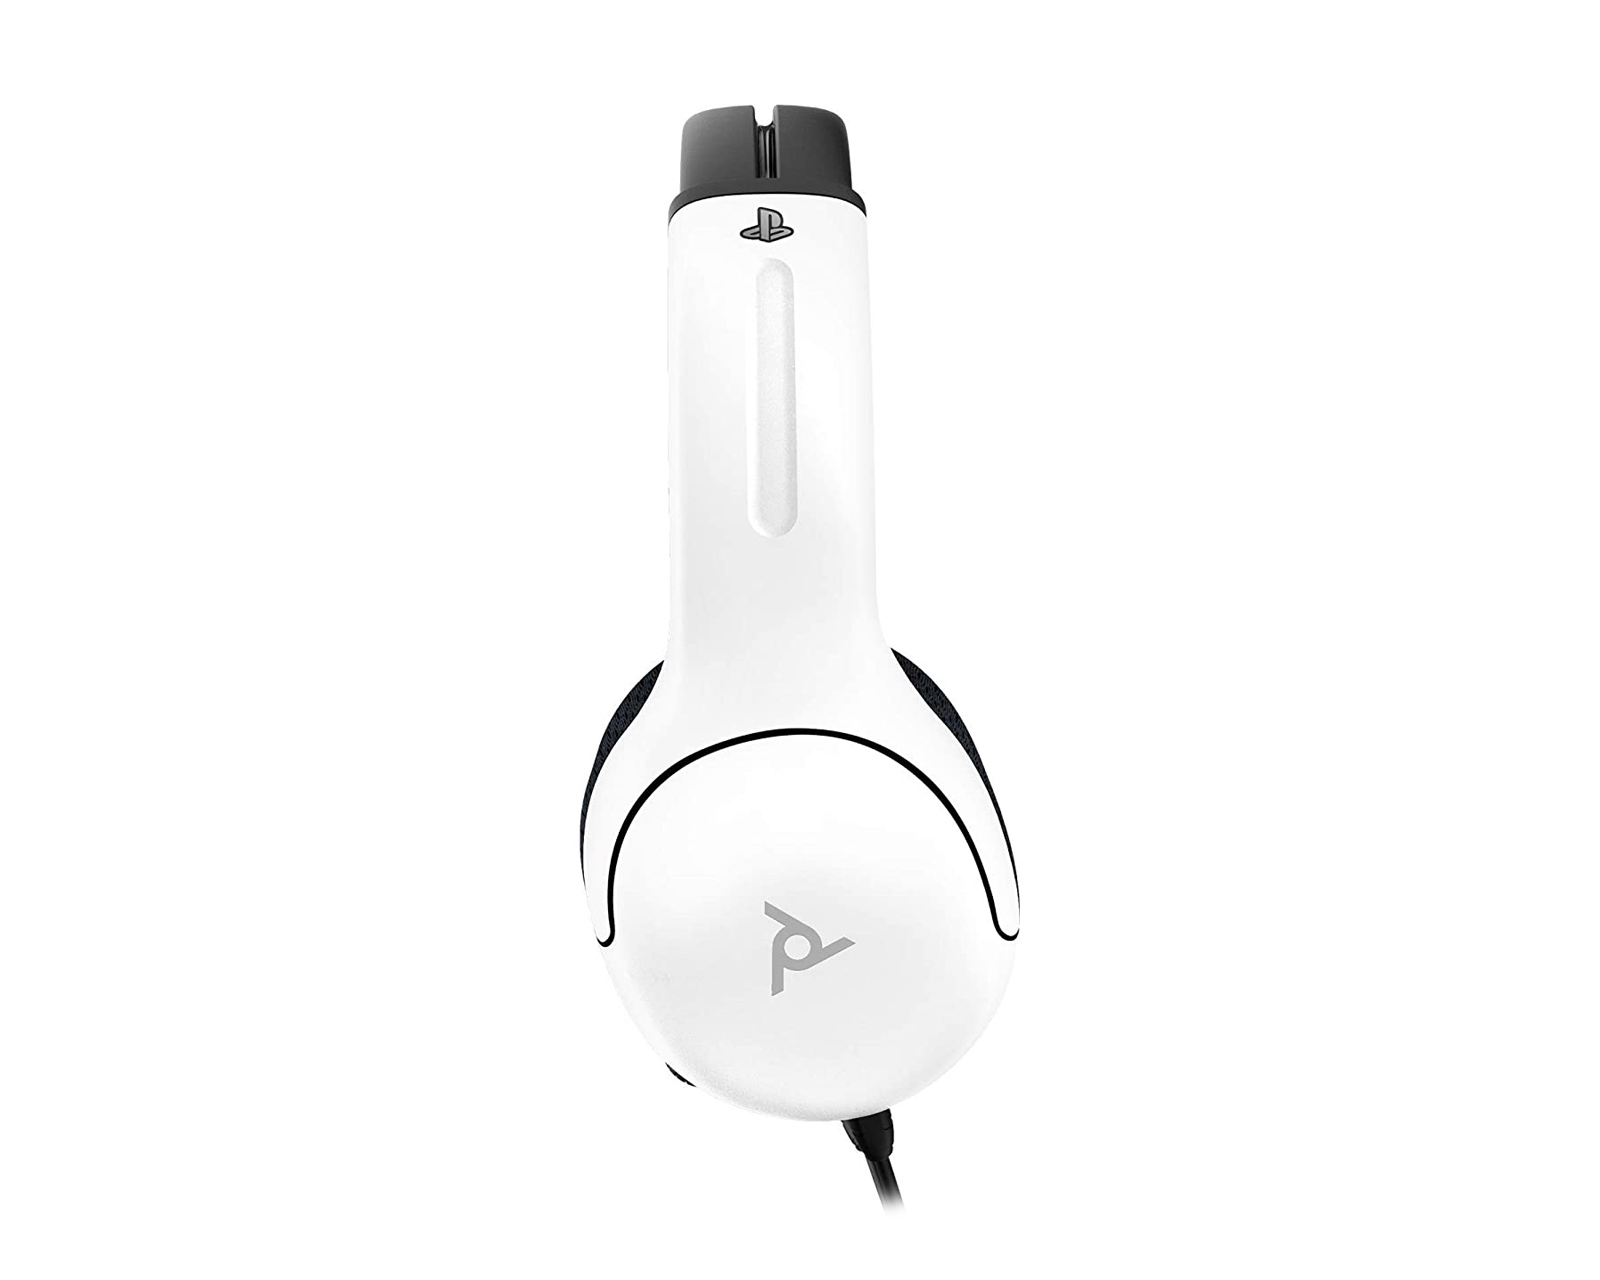 PDP LVL 40 PS4 White Gaming Headset and NEAT Skyline Microphone combo